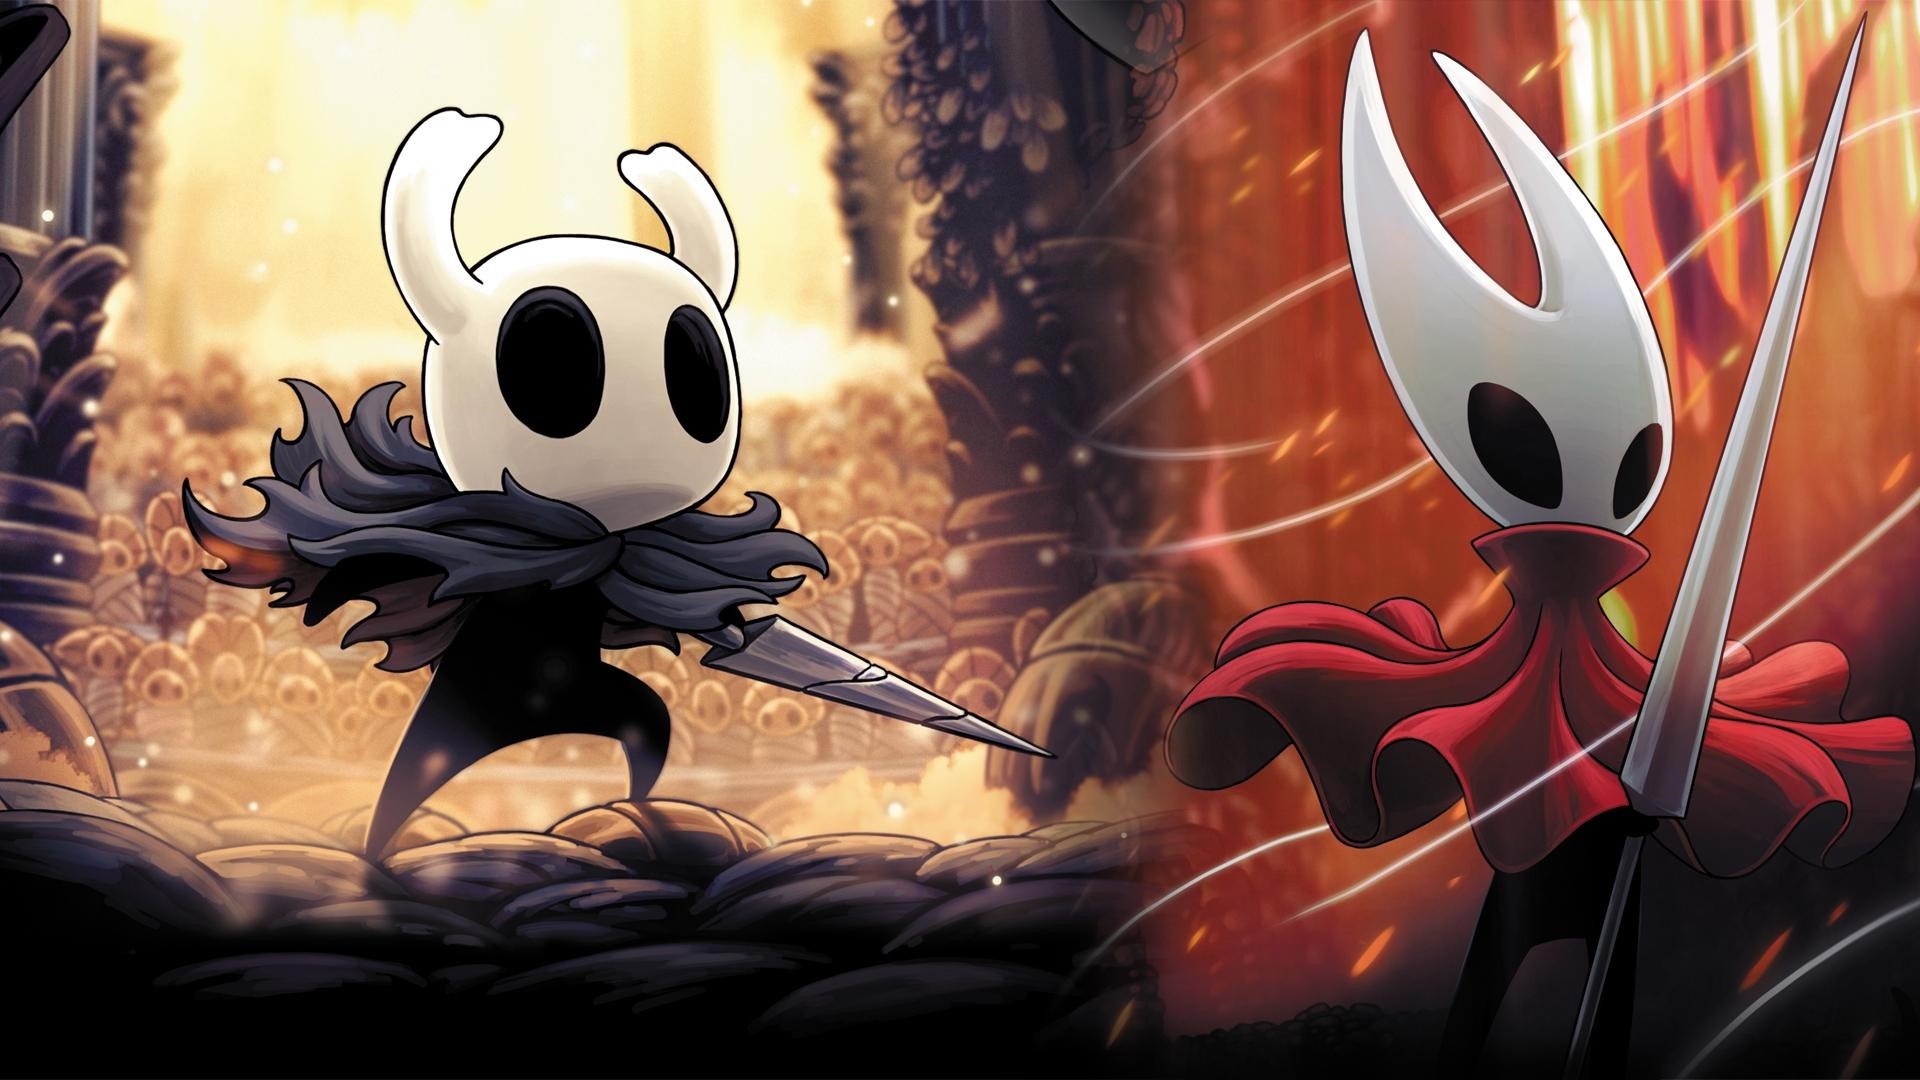 Hollow Knight Wallpaper for pc